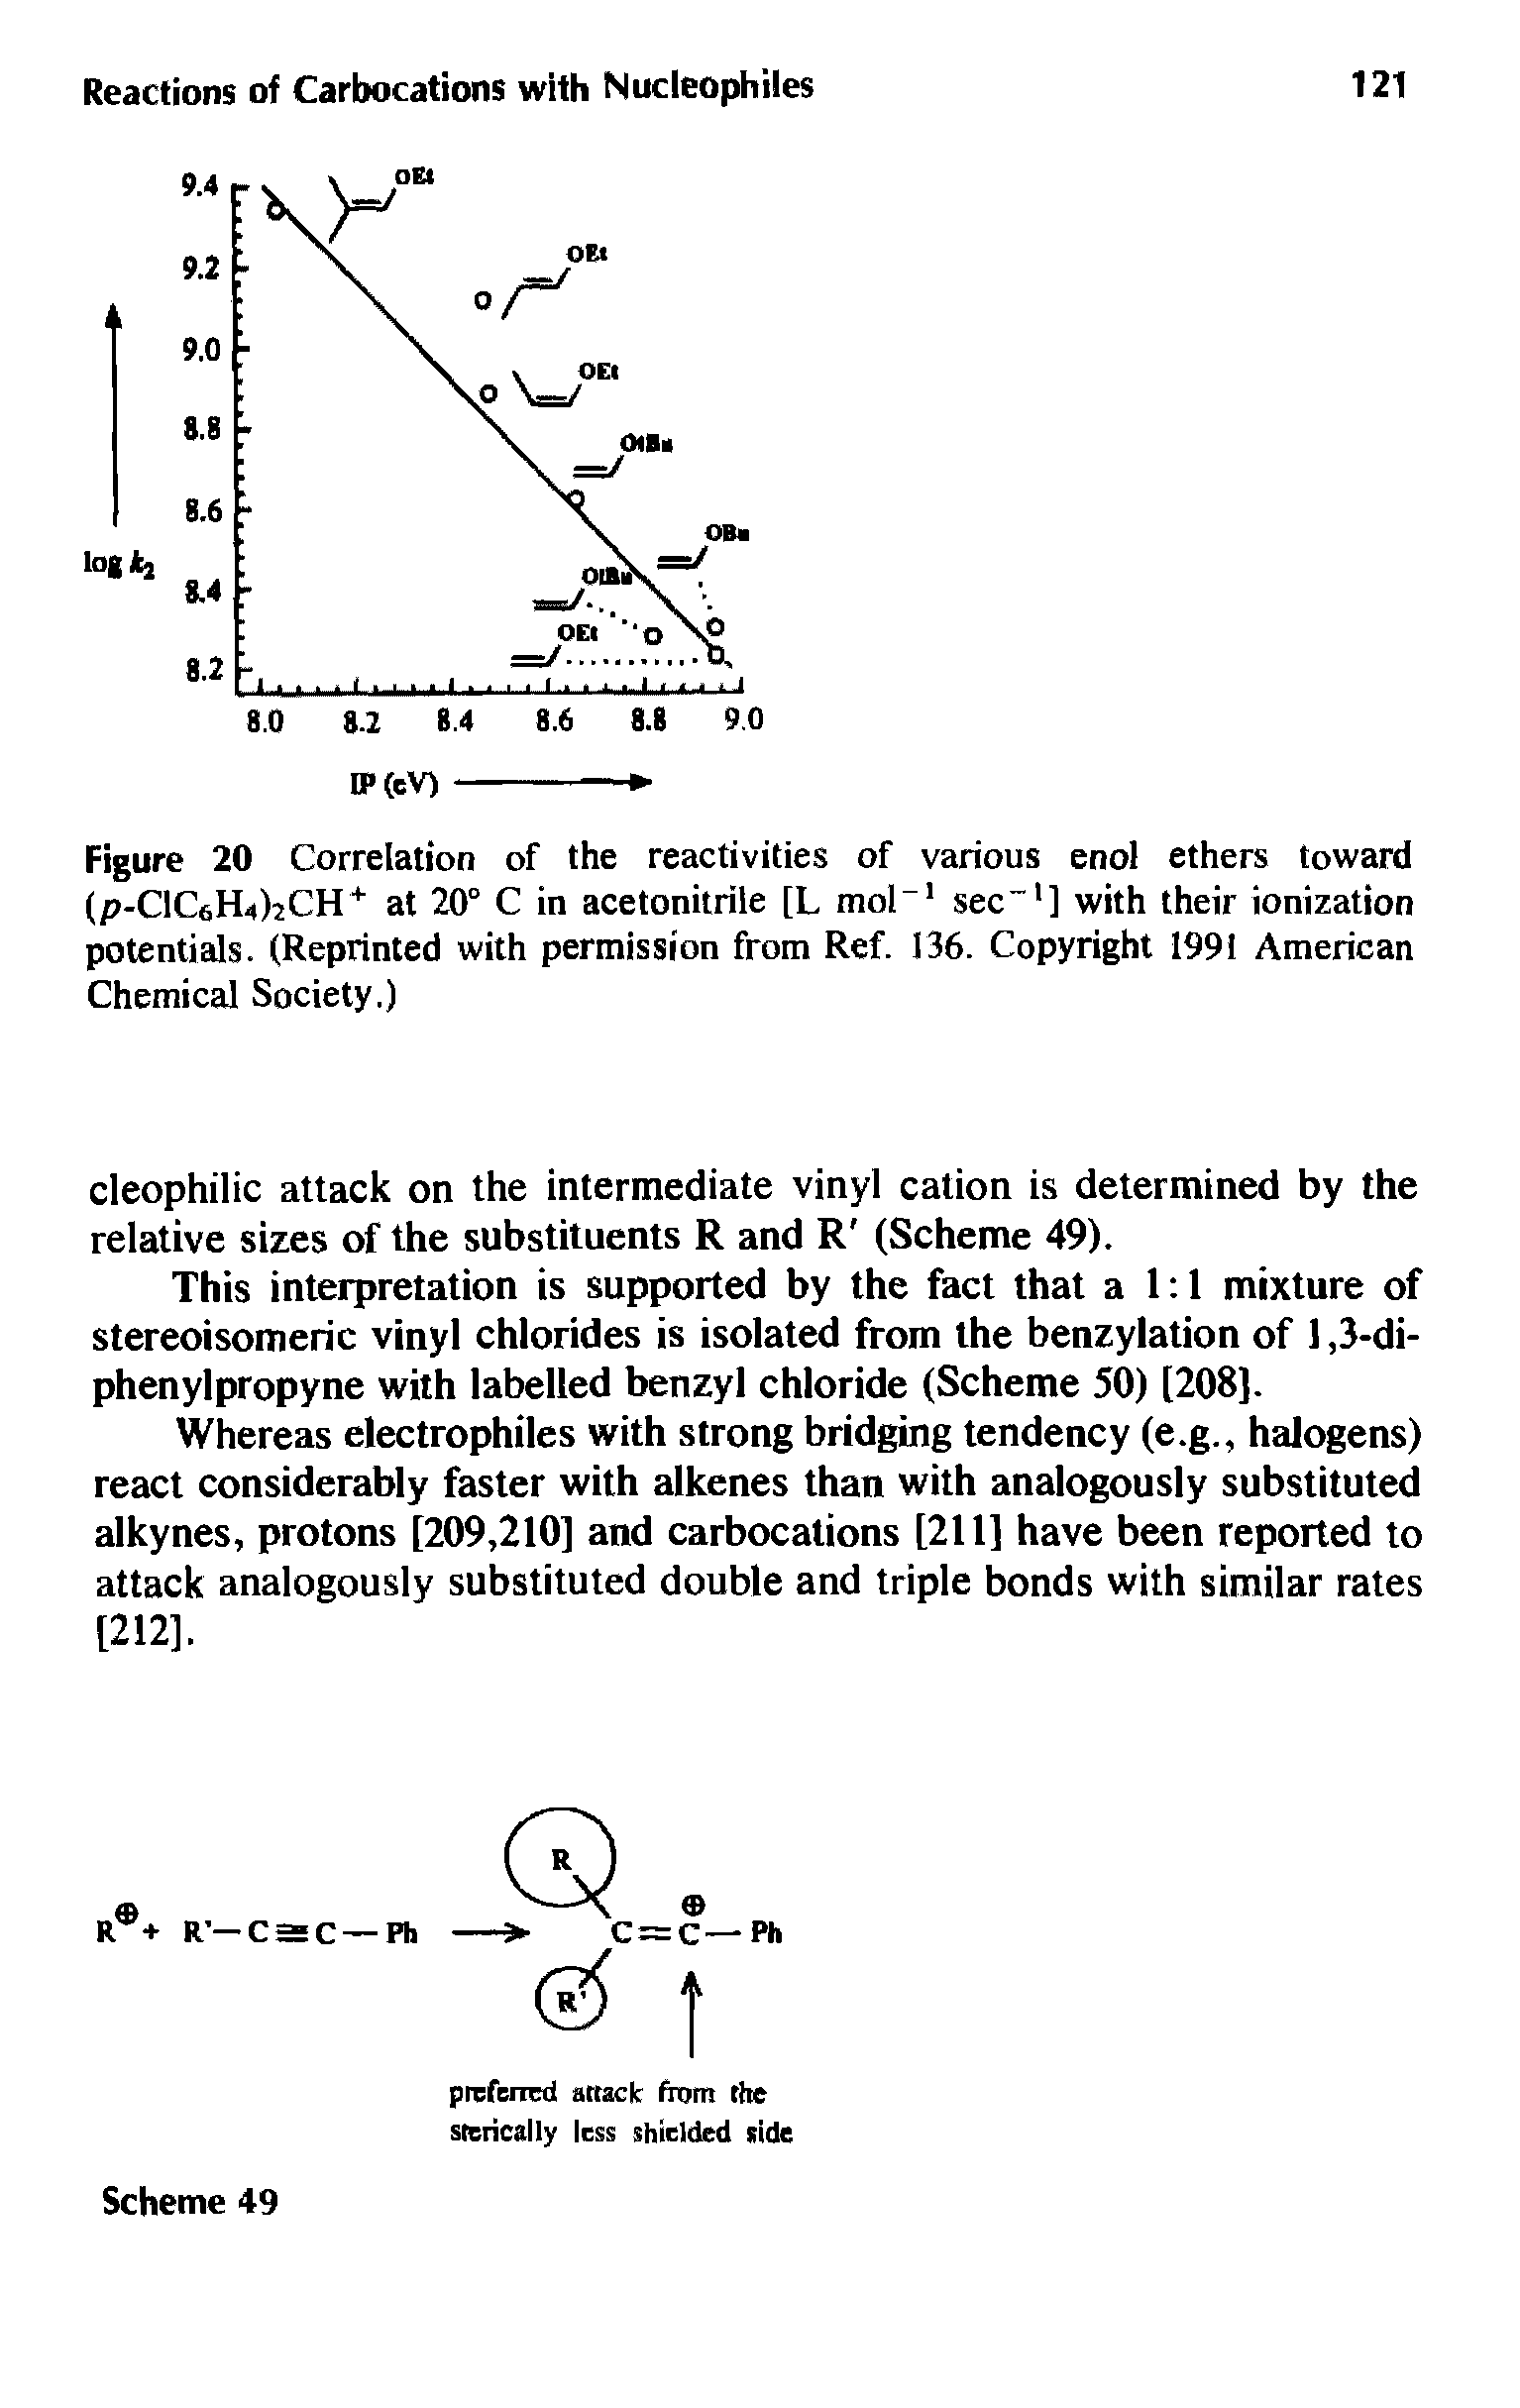 Figure 20 Correlation of the reactivities of various enol ethers toward (p-ClCsH-OsCH at 20° C in acetonitrile [L mol-1 sec ] with their ionization potentials. (Reprinted with permission from Ref. 136. Copyright 1991 American Chemical Society.)...